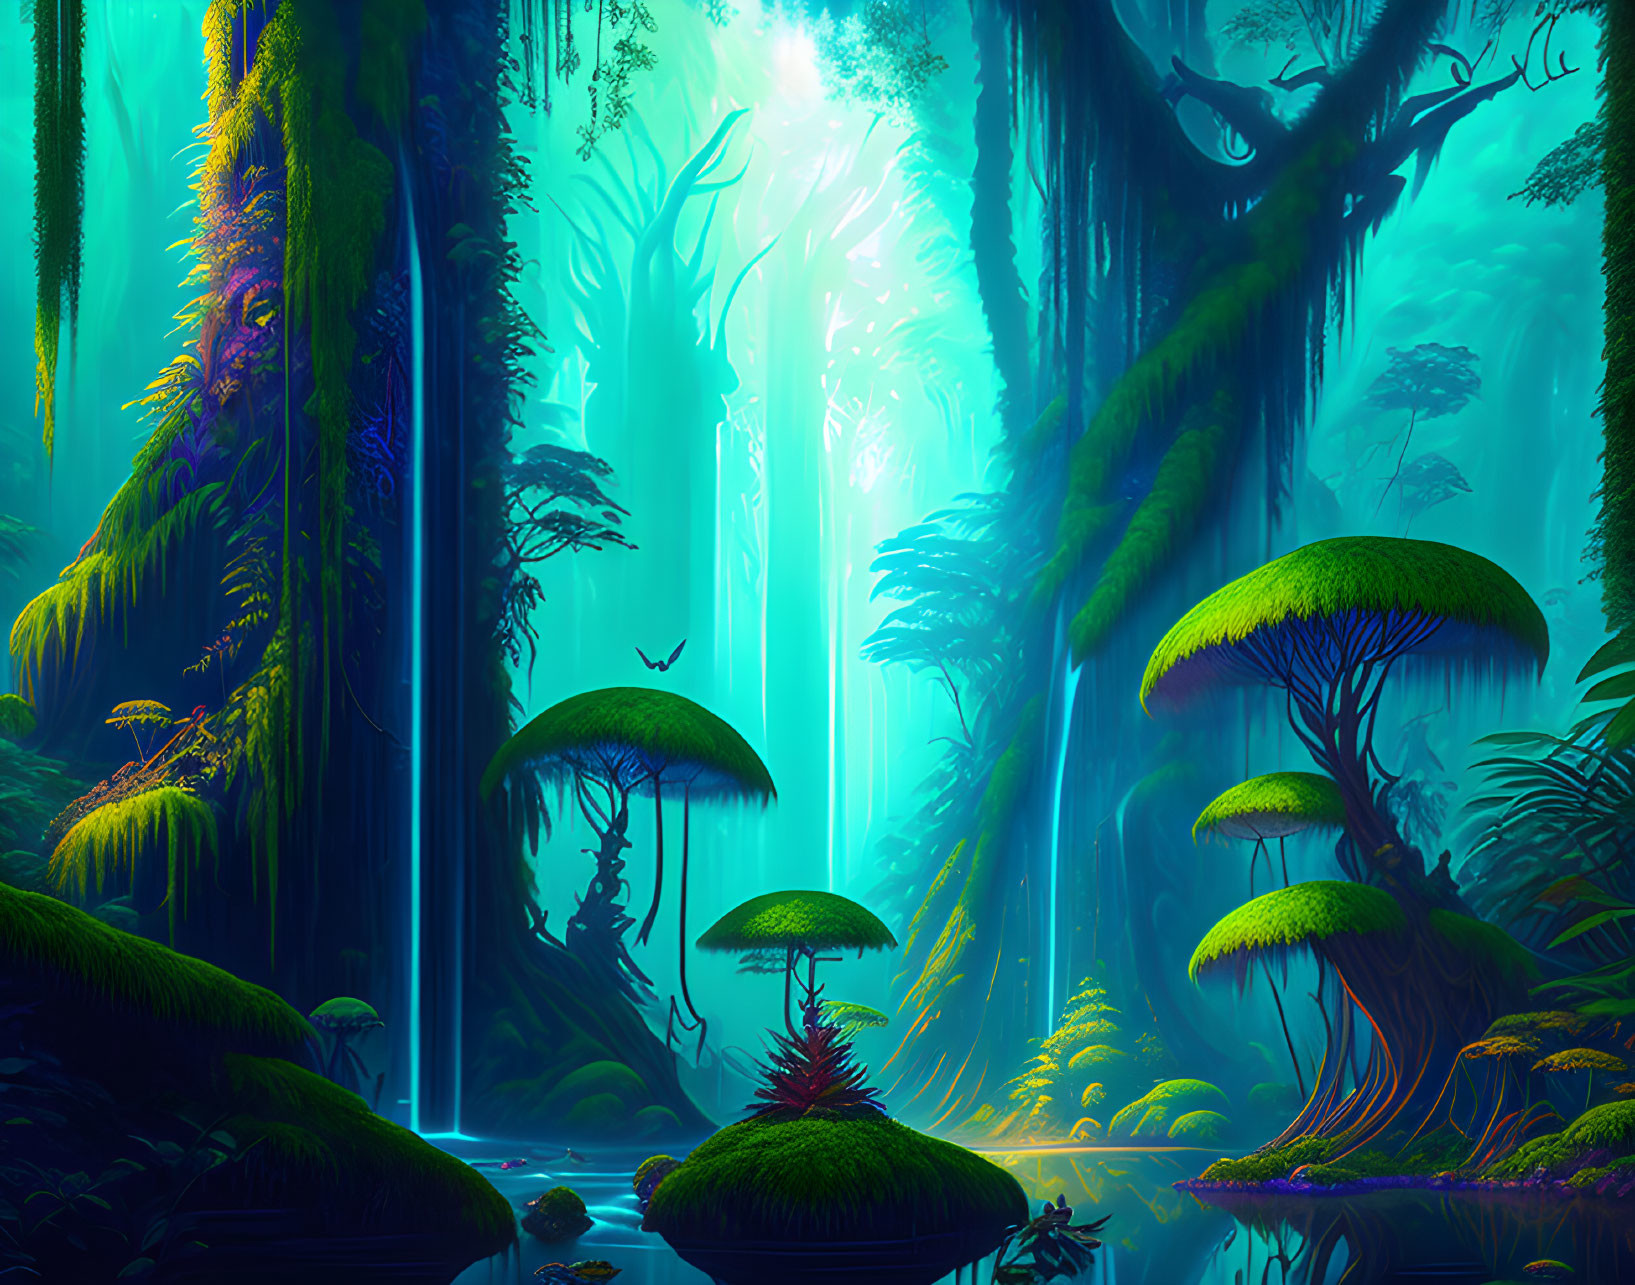 Mystical forest with oversized mushrooms, pond, and light beams